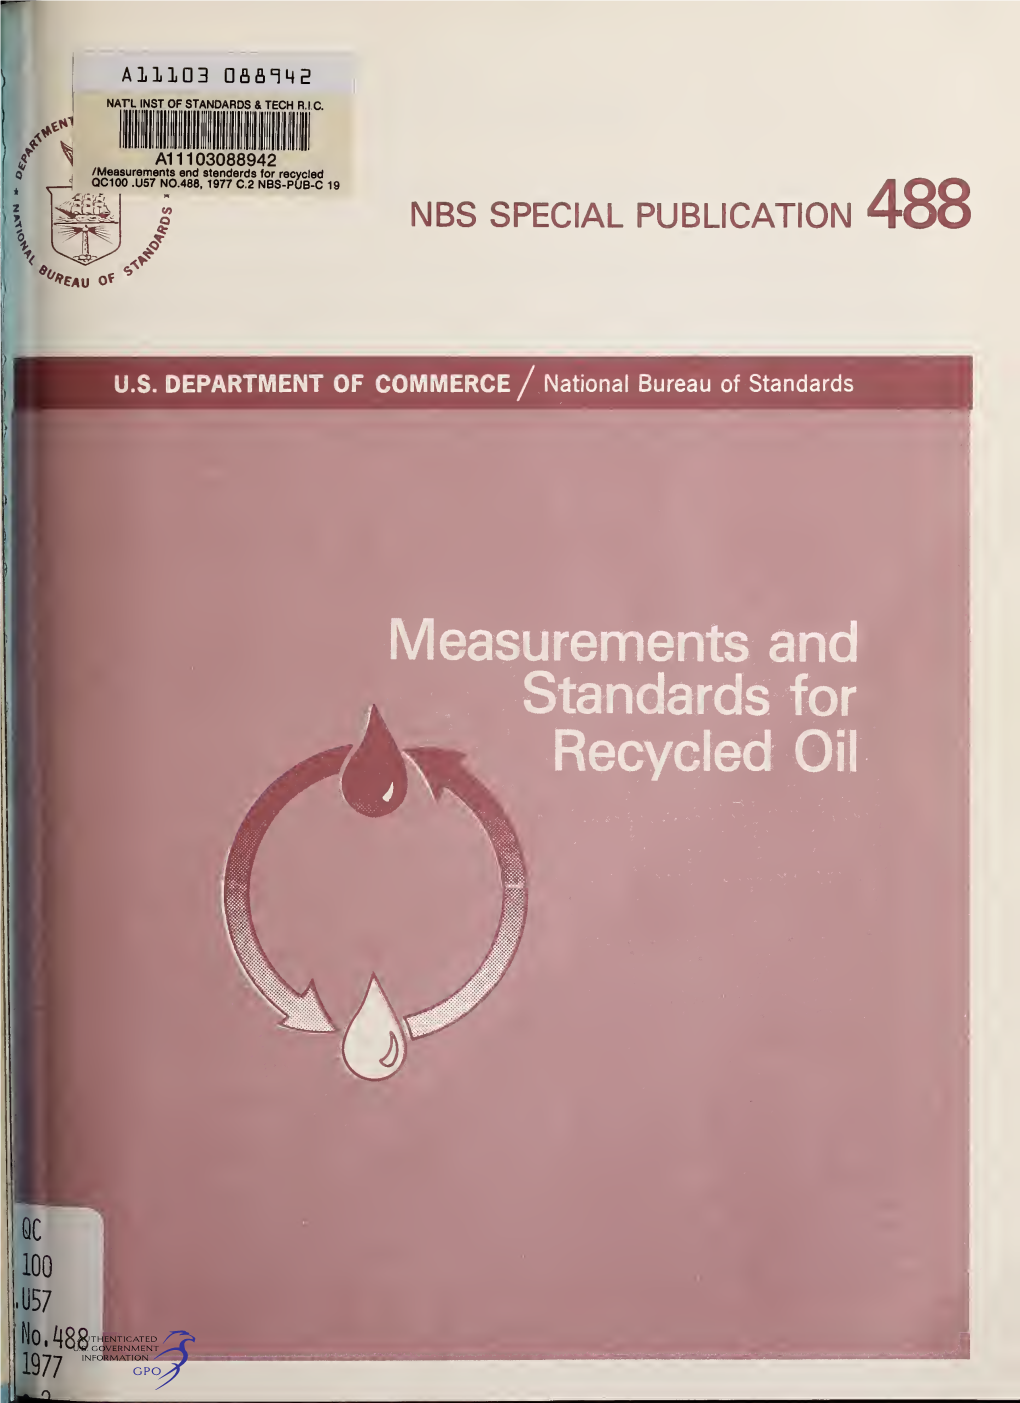 Measurements and Standards for Recycled QC100 .U57 N0.488, 1977 C.2 NBS-PUB-C 19 NBS SPECIAL PUBLICATION 488